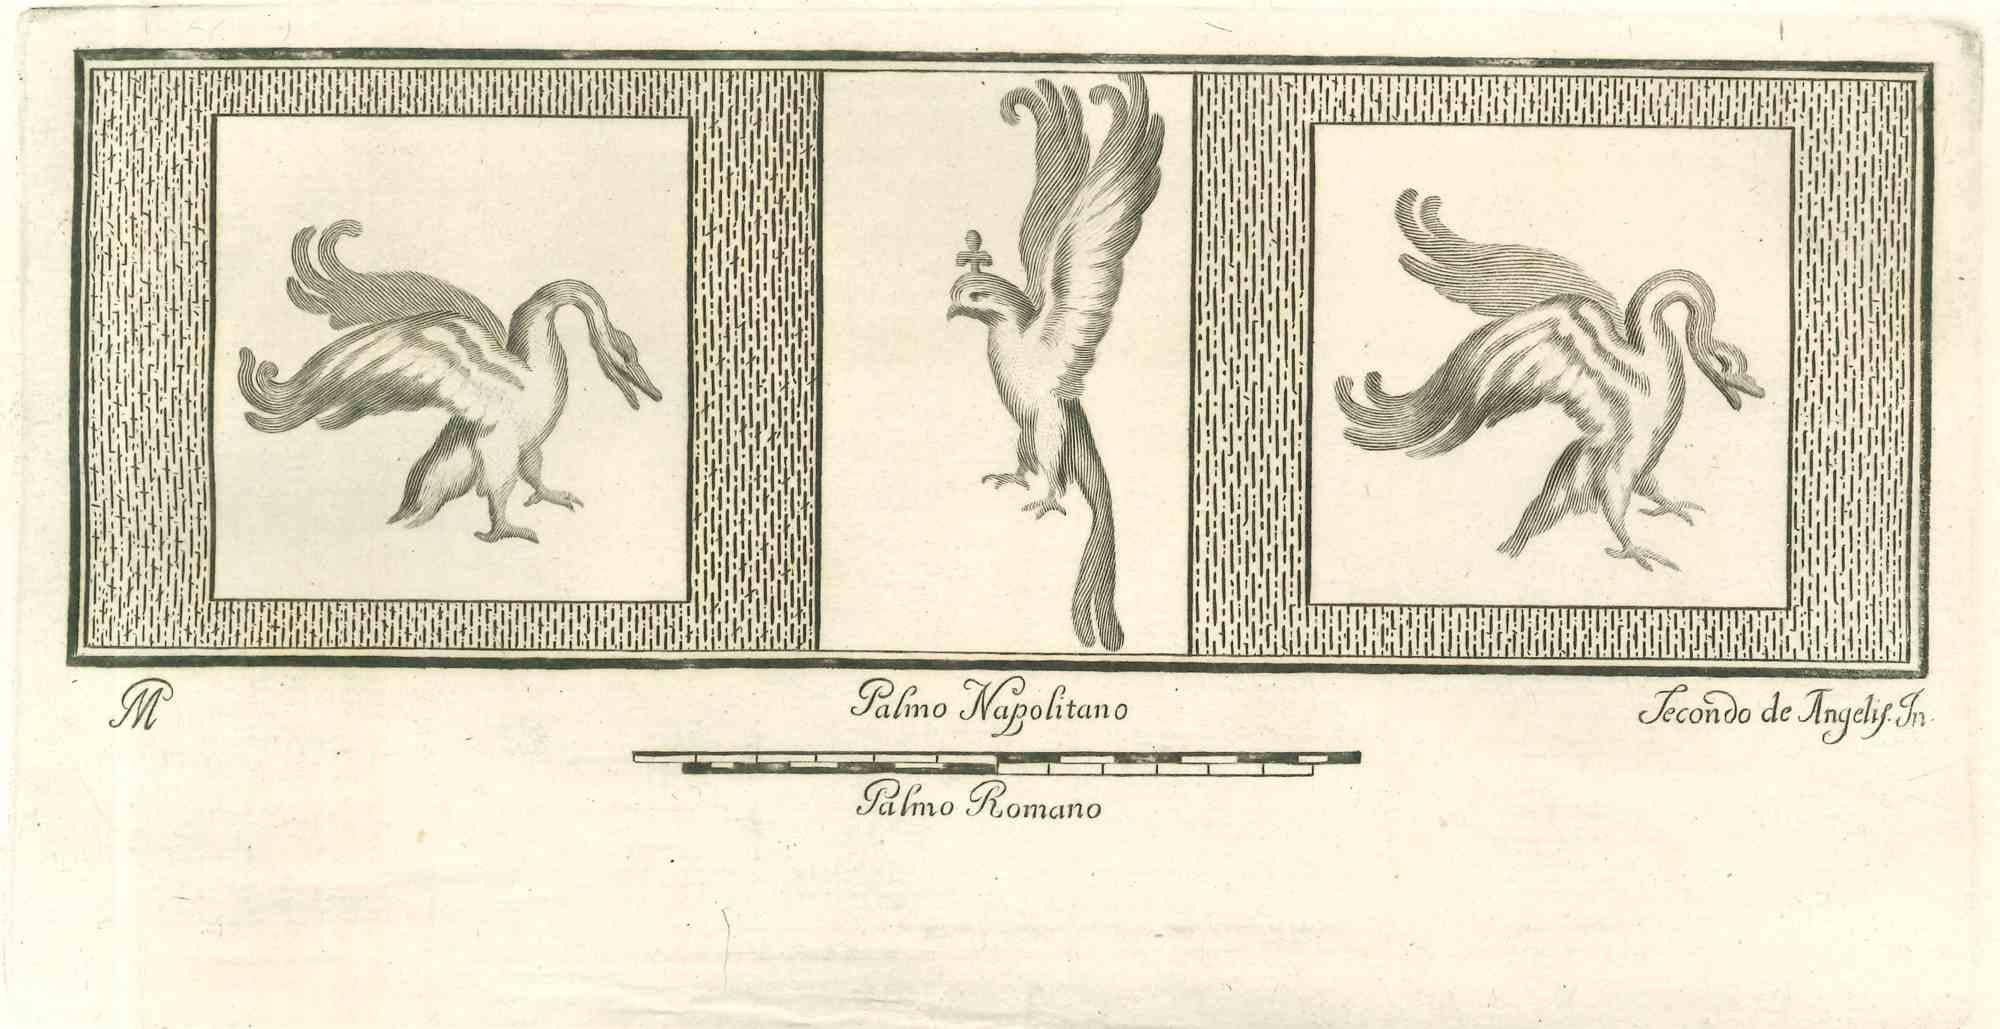 Birds Pompeian Fresco from "Antiquities of Herculaneum" is an etching on paper realized by Secondo De Angelis in the 18th Century.

Signed on the plate.

Good conditions.

The etching belongs to the print suite “Antiquities of Herculaneum Exposed”